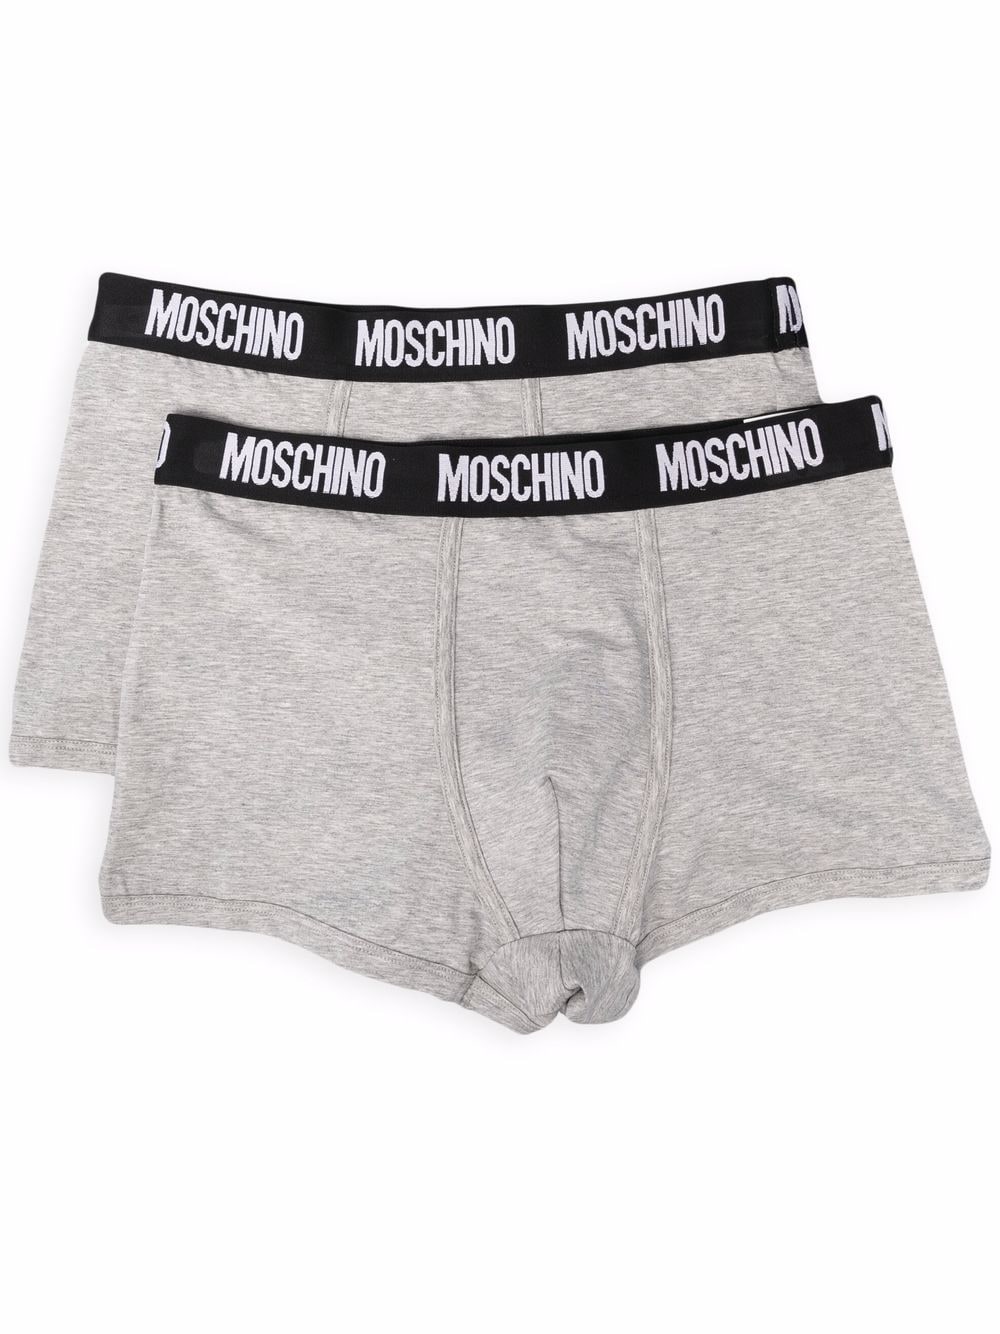 Moschino two-pack logo-waistband boxer briefs